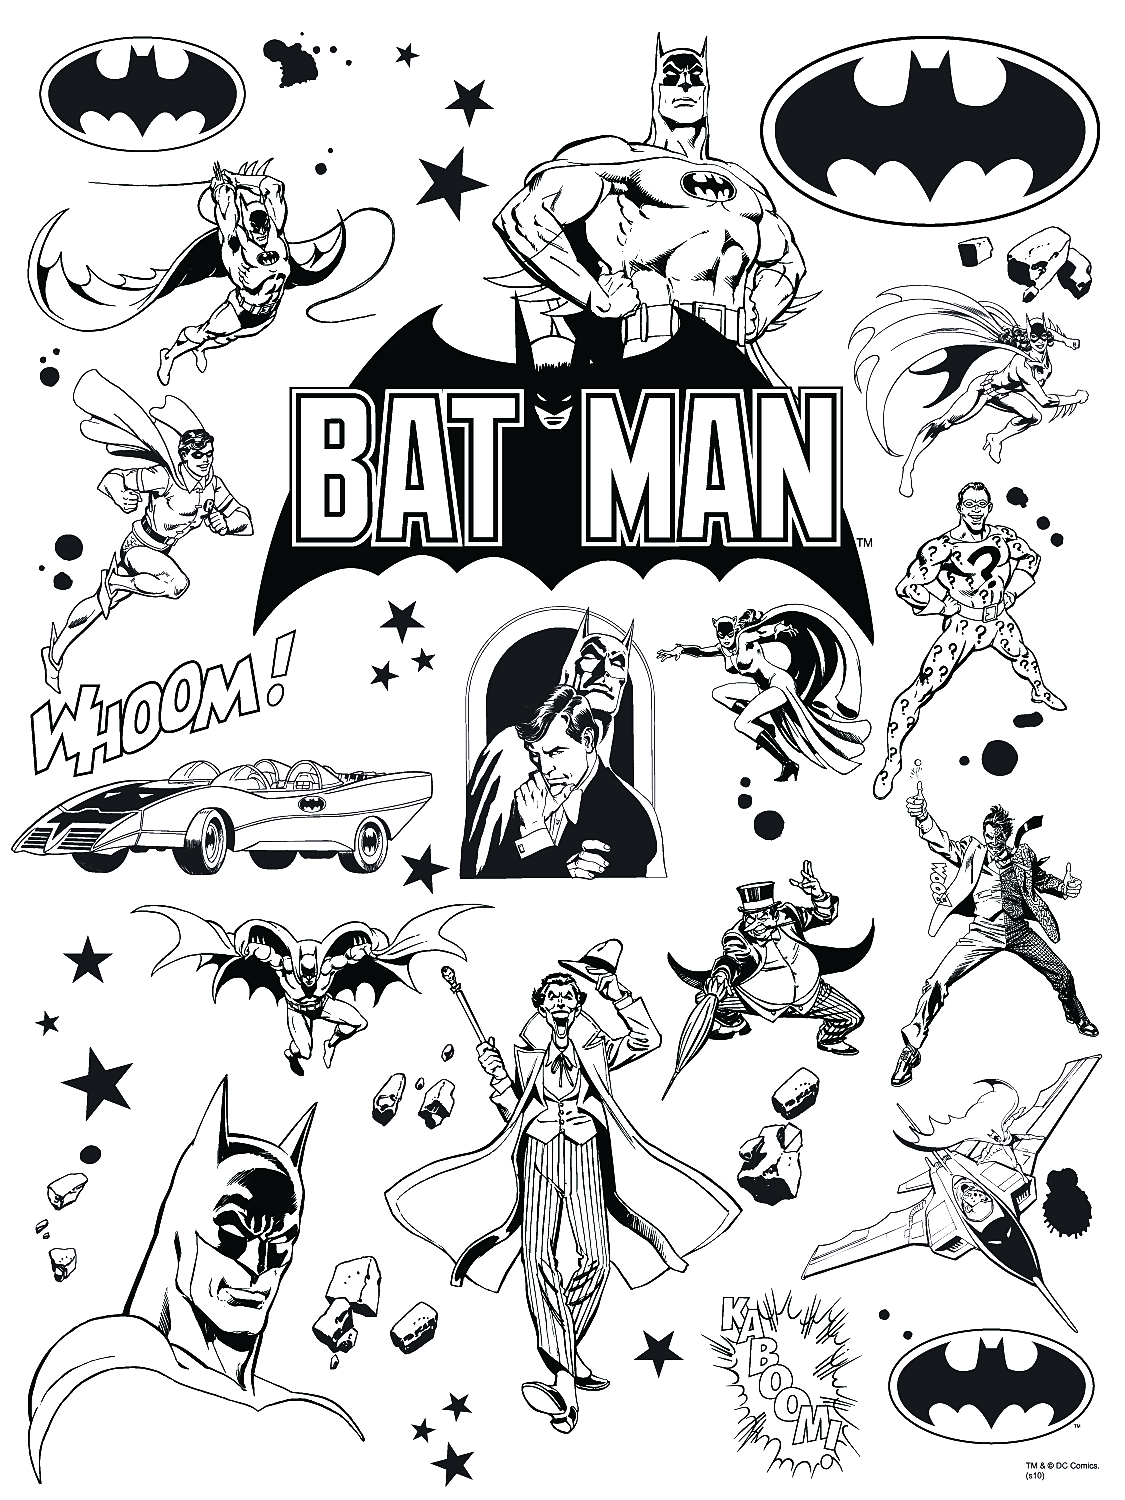 MAY101735 - DC HEROES BATMAN B&W COLLAGE WALL SCROLL - Previews World